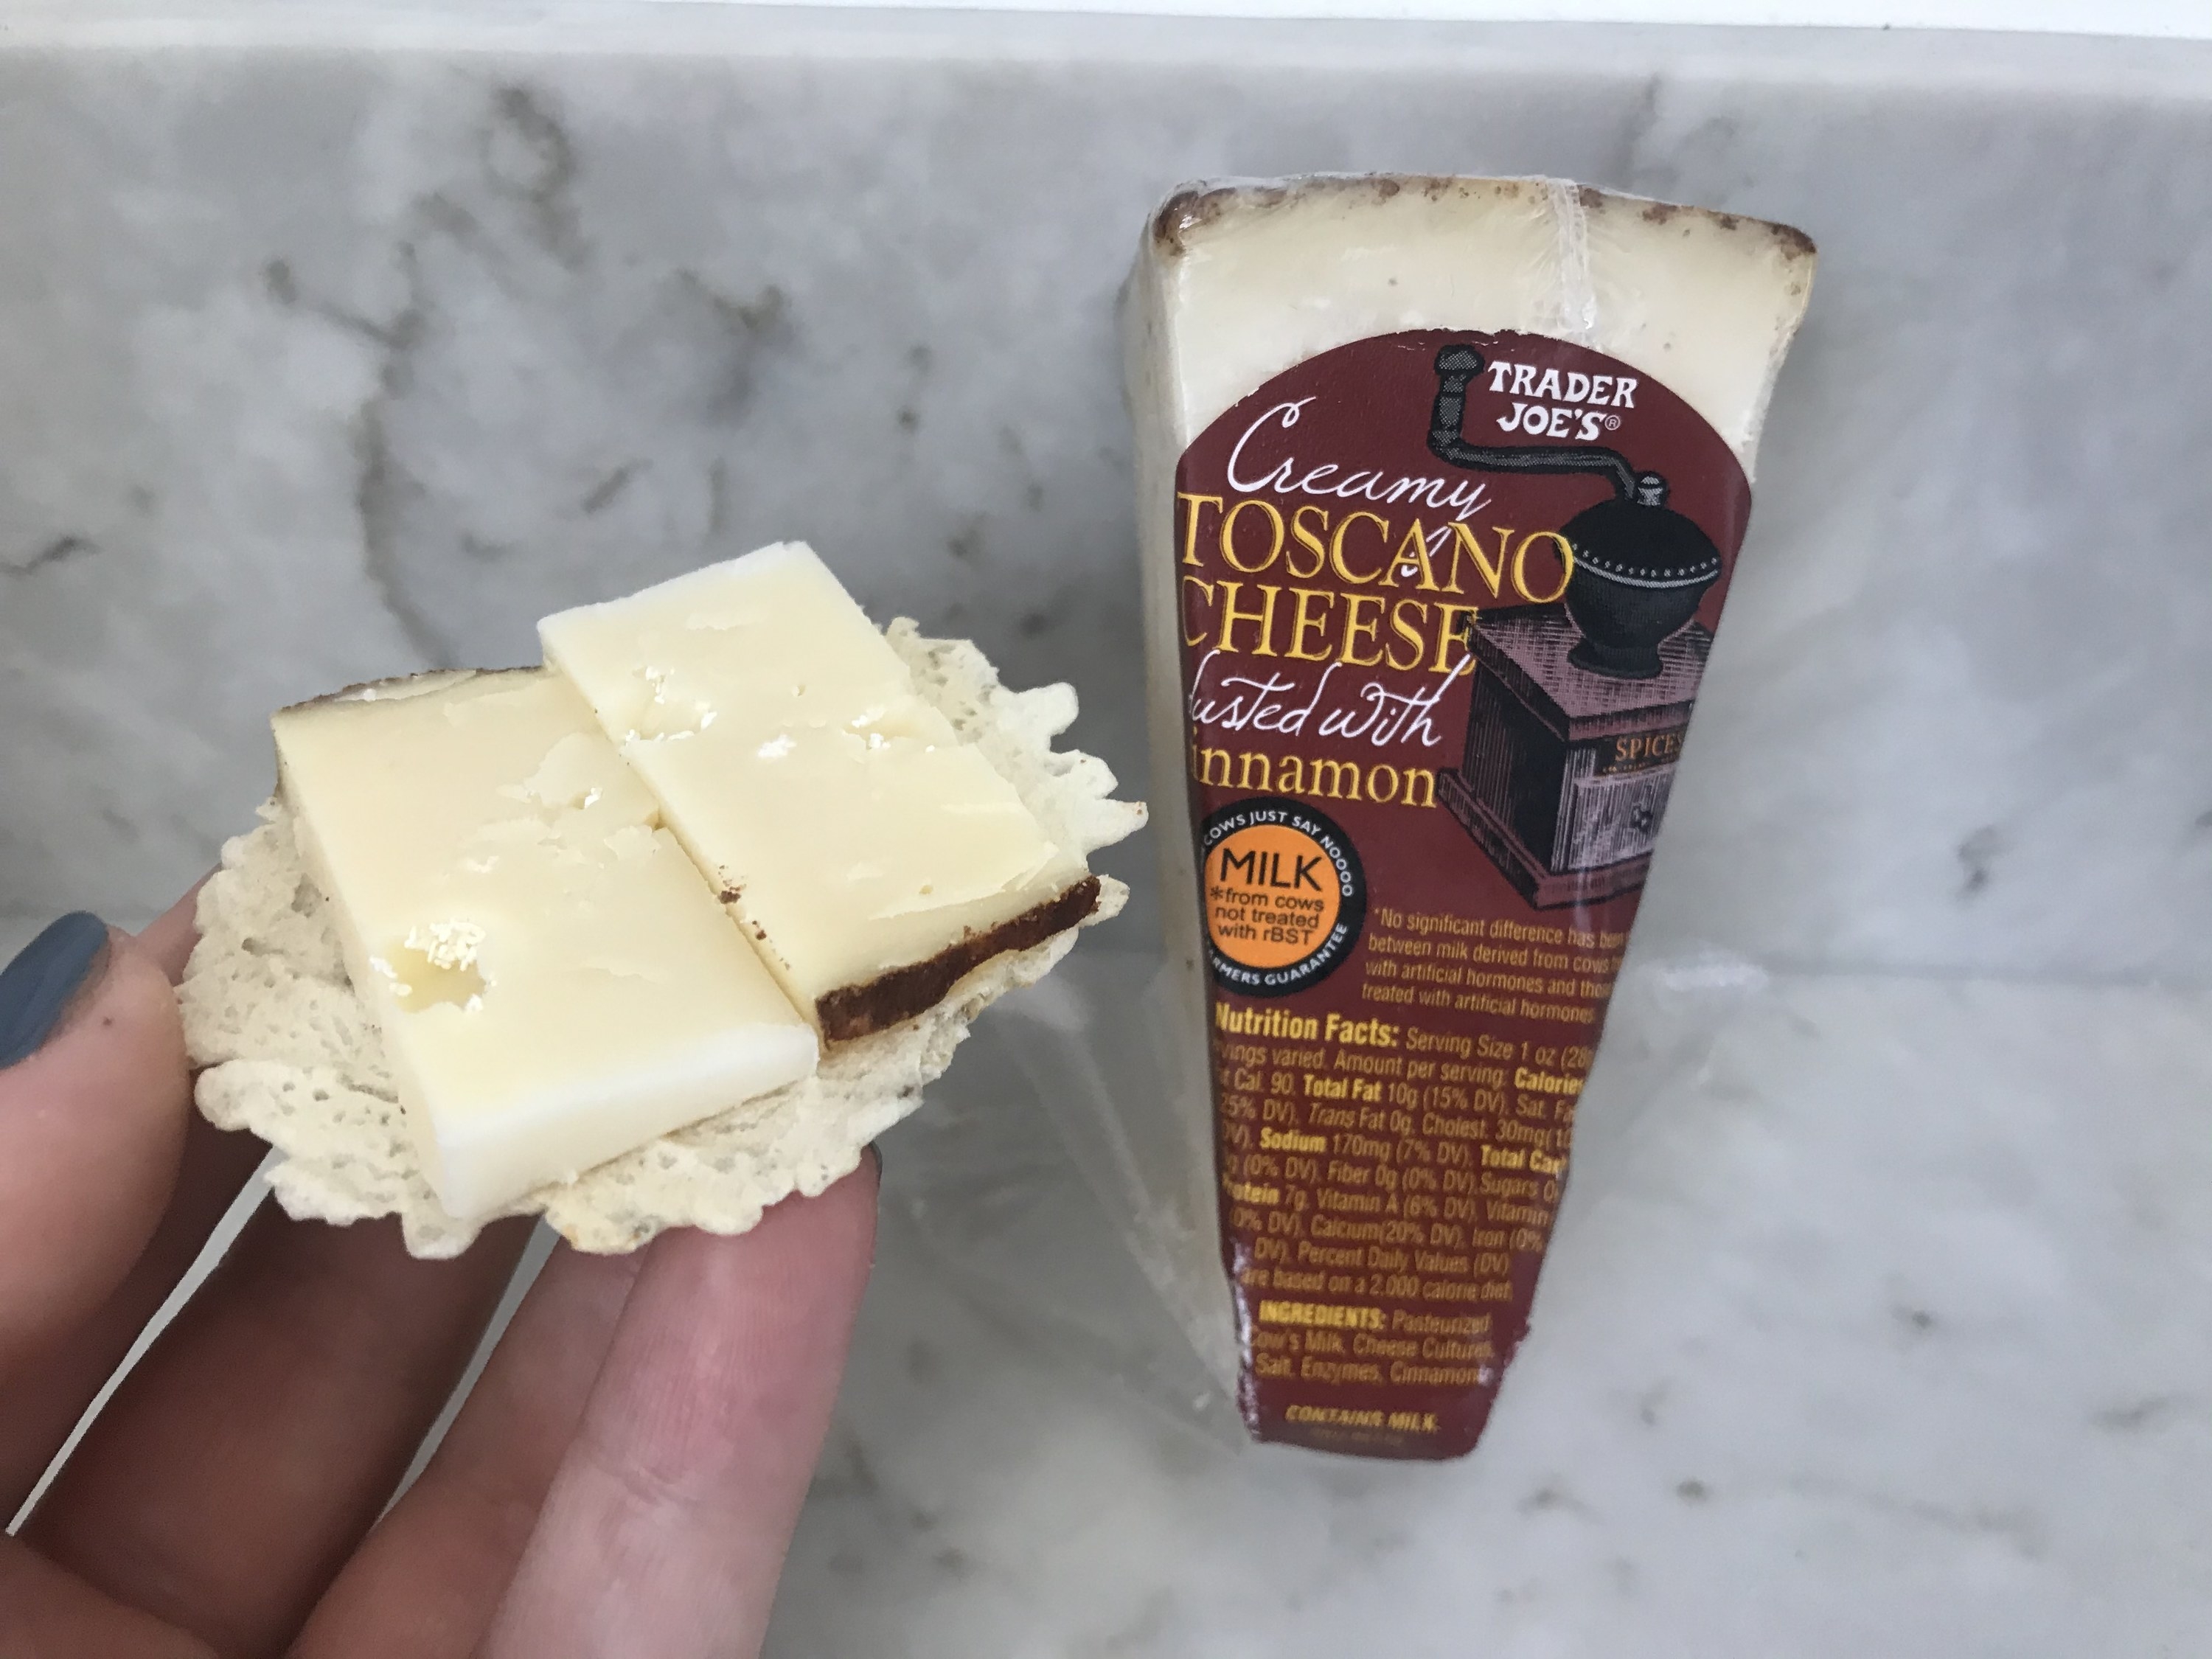 A wedge of cheese in a dark red packaging leans against a marble backdrop next to a hand holding up a cracker topped with two thin slices of cheese